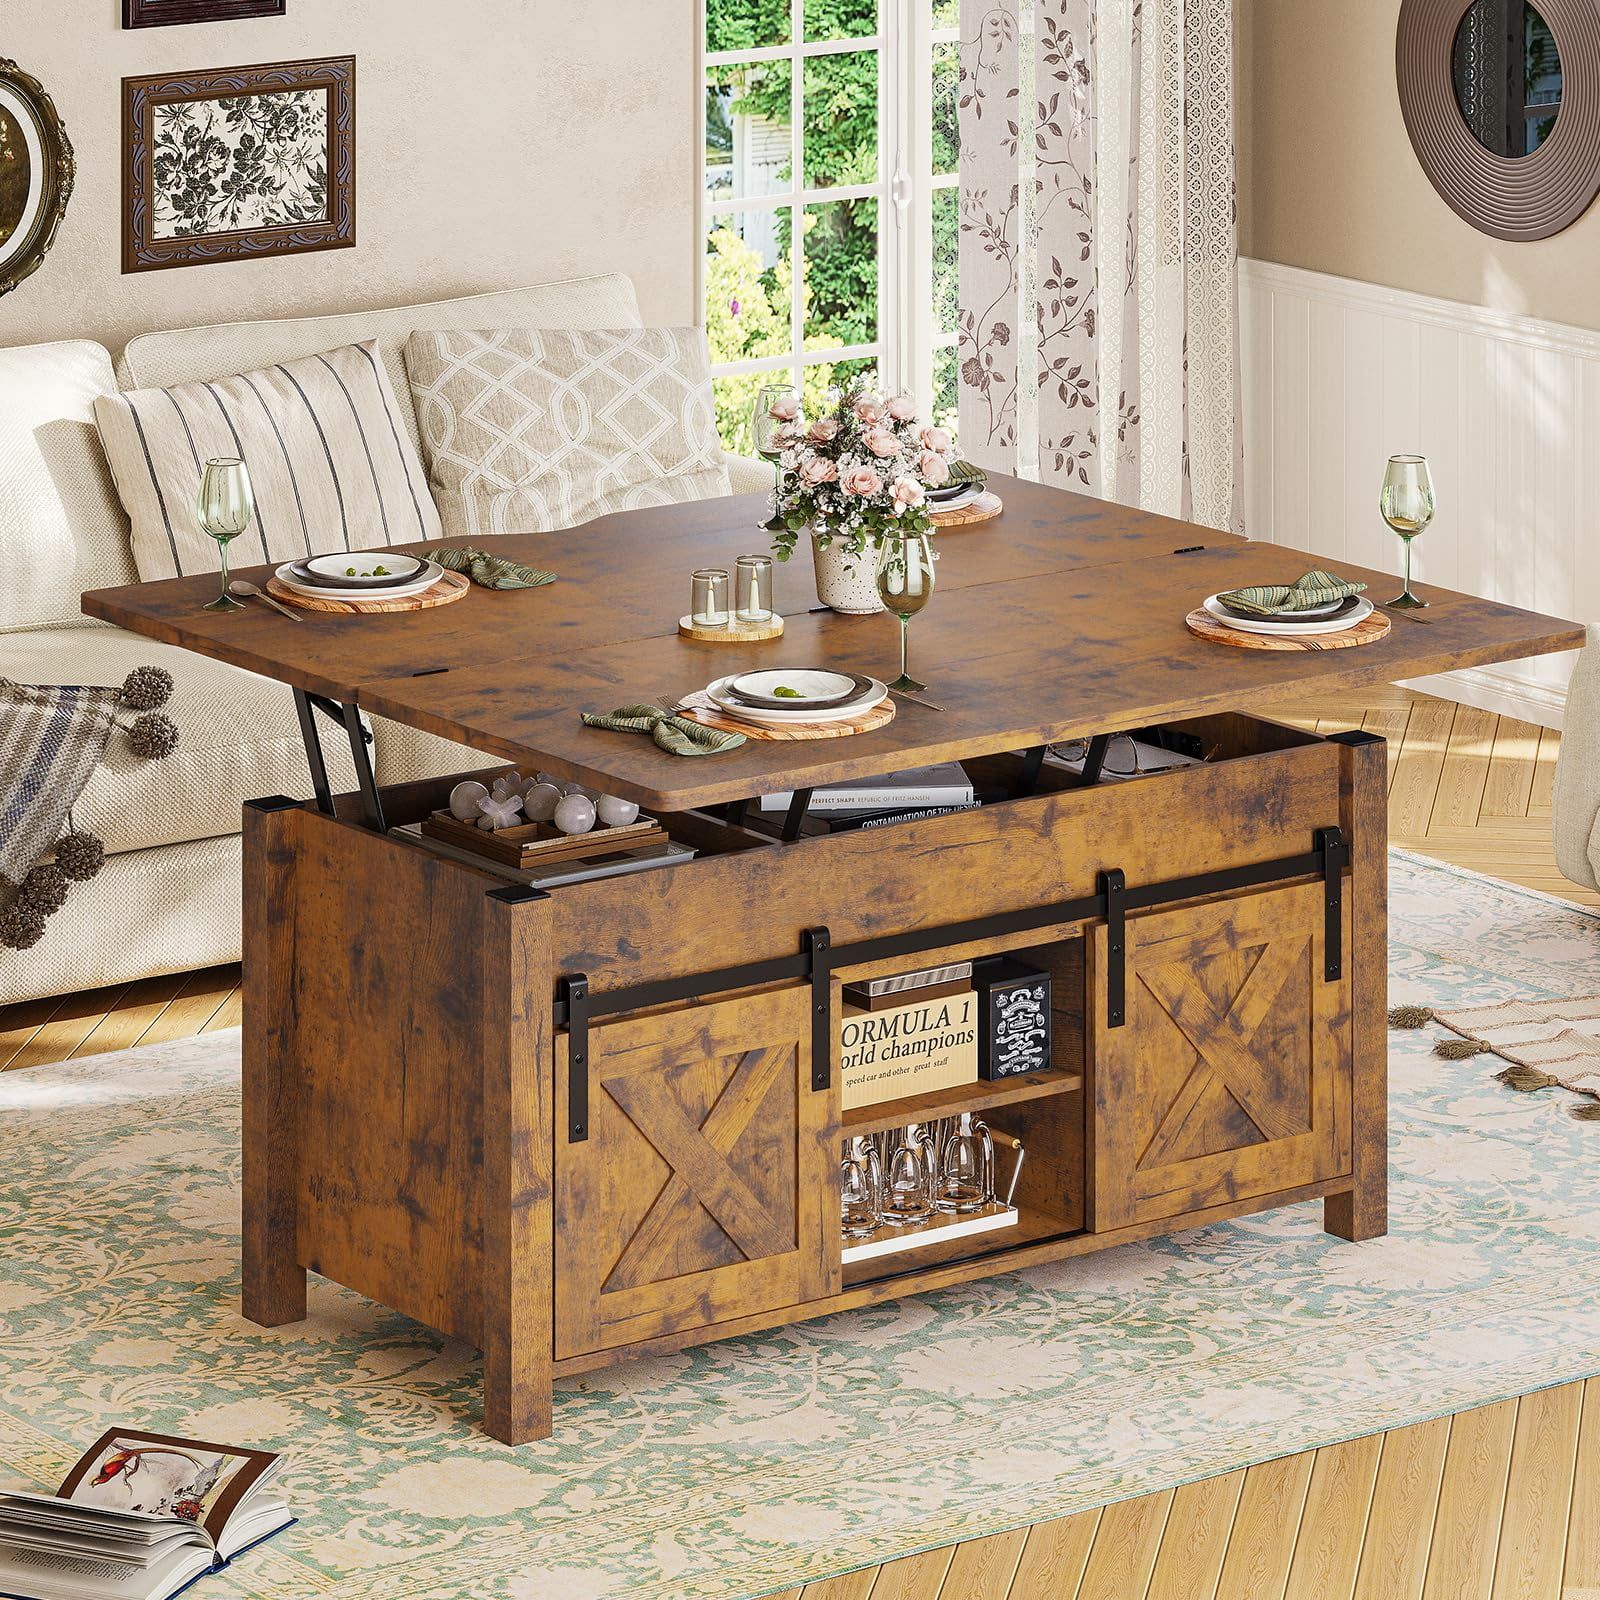 Coffee Table For Living Room, Farmhouse Lift Top Coffee Tables With Storage  And Hidden Compartment, Rising Tabletop Center Table For Living Room  Reception Room, Rustic Brown – Walmart Regarding Farmhouse Lift Top Tables (View 6 of 15)